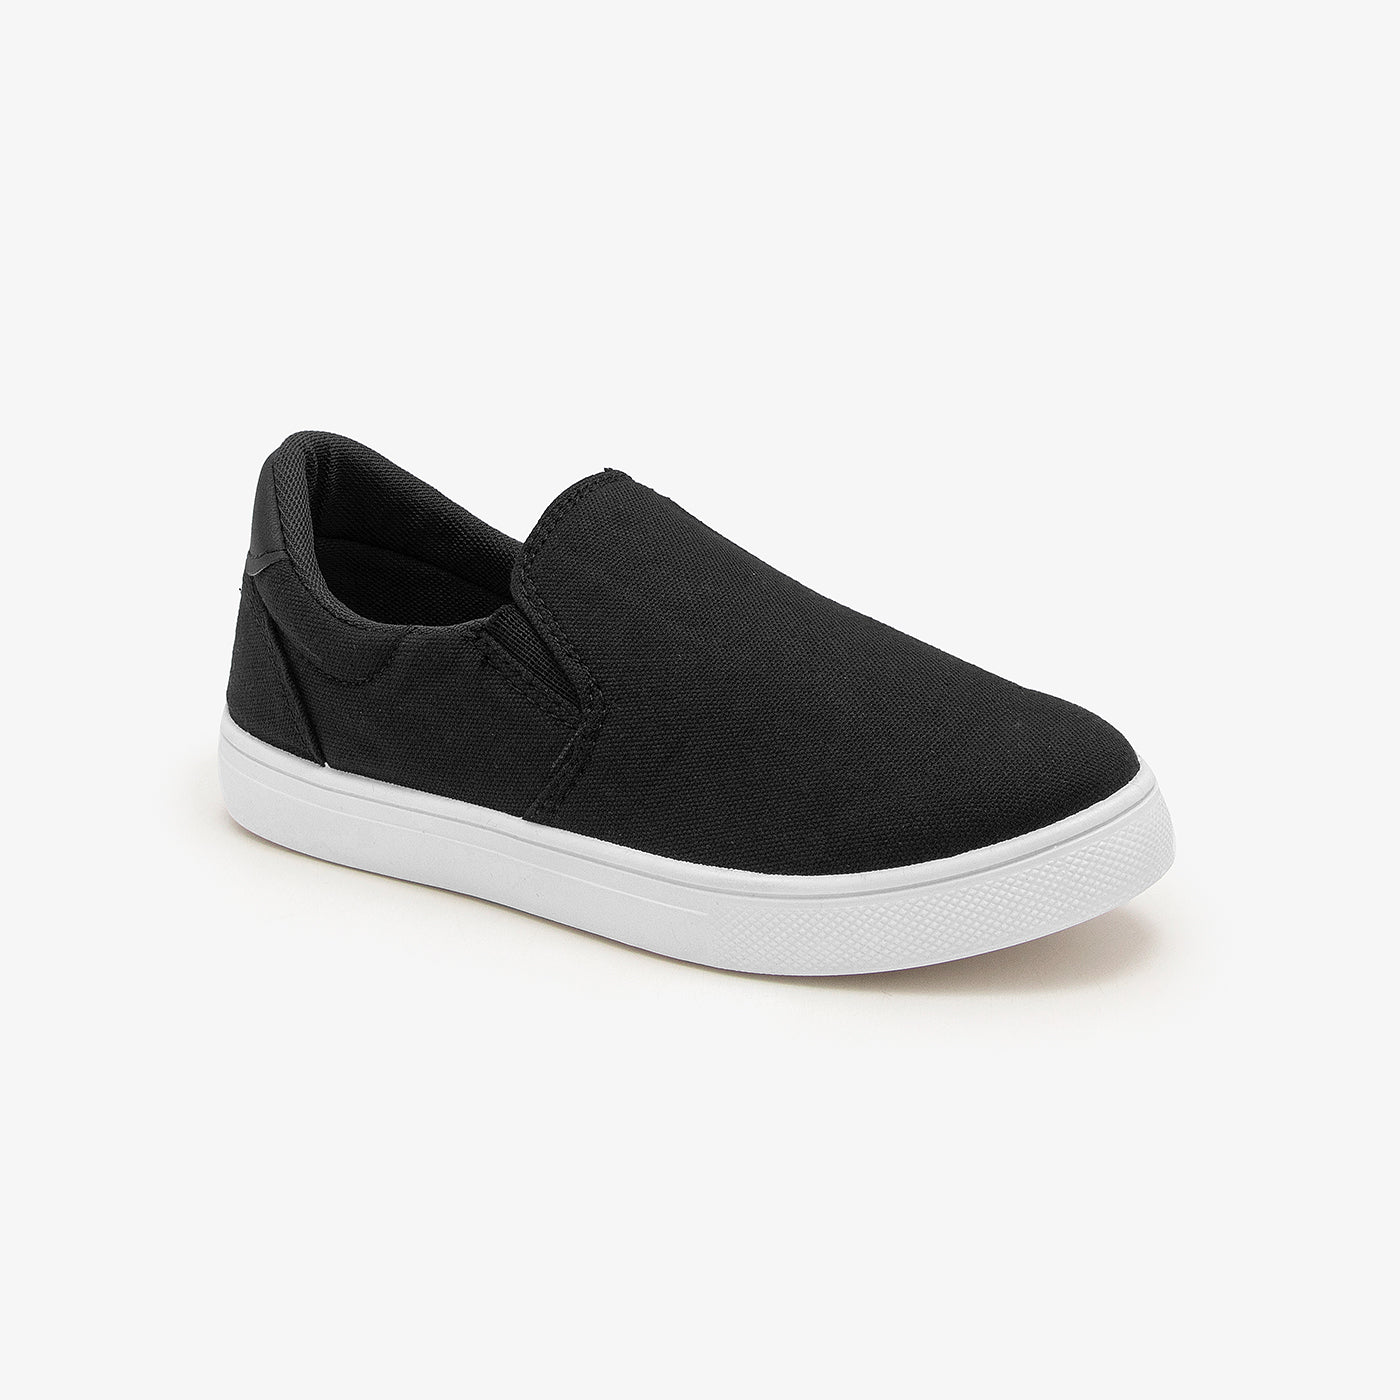 Athletic Canvas Slip Ons